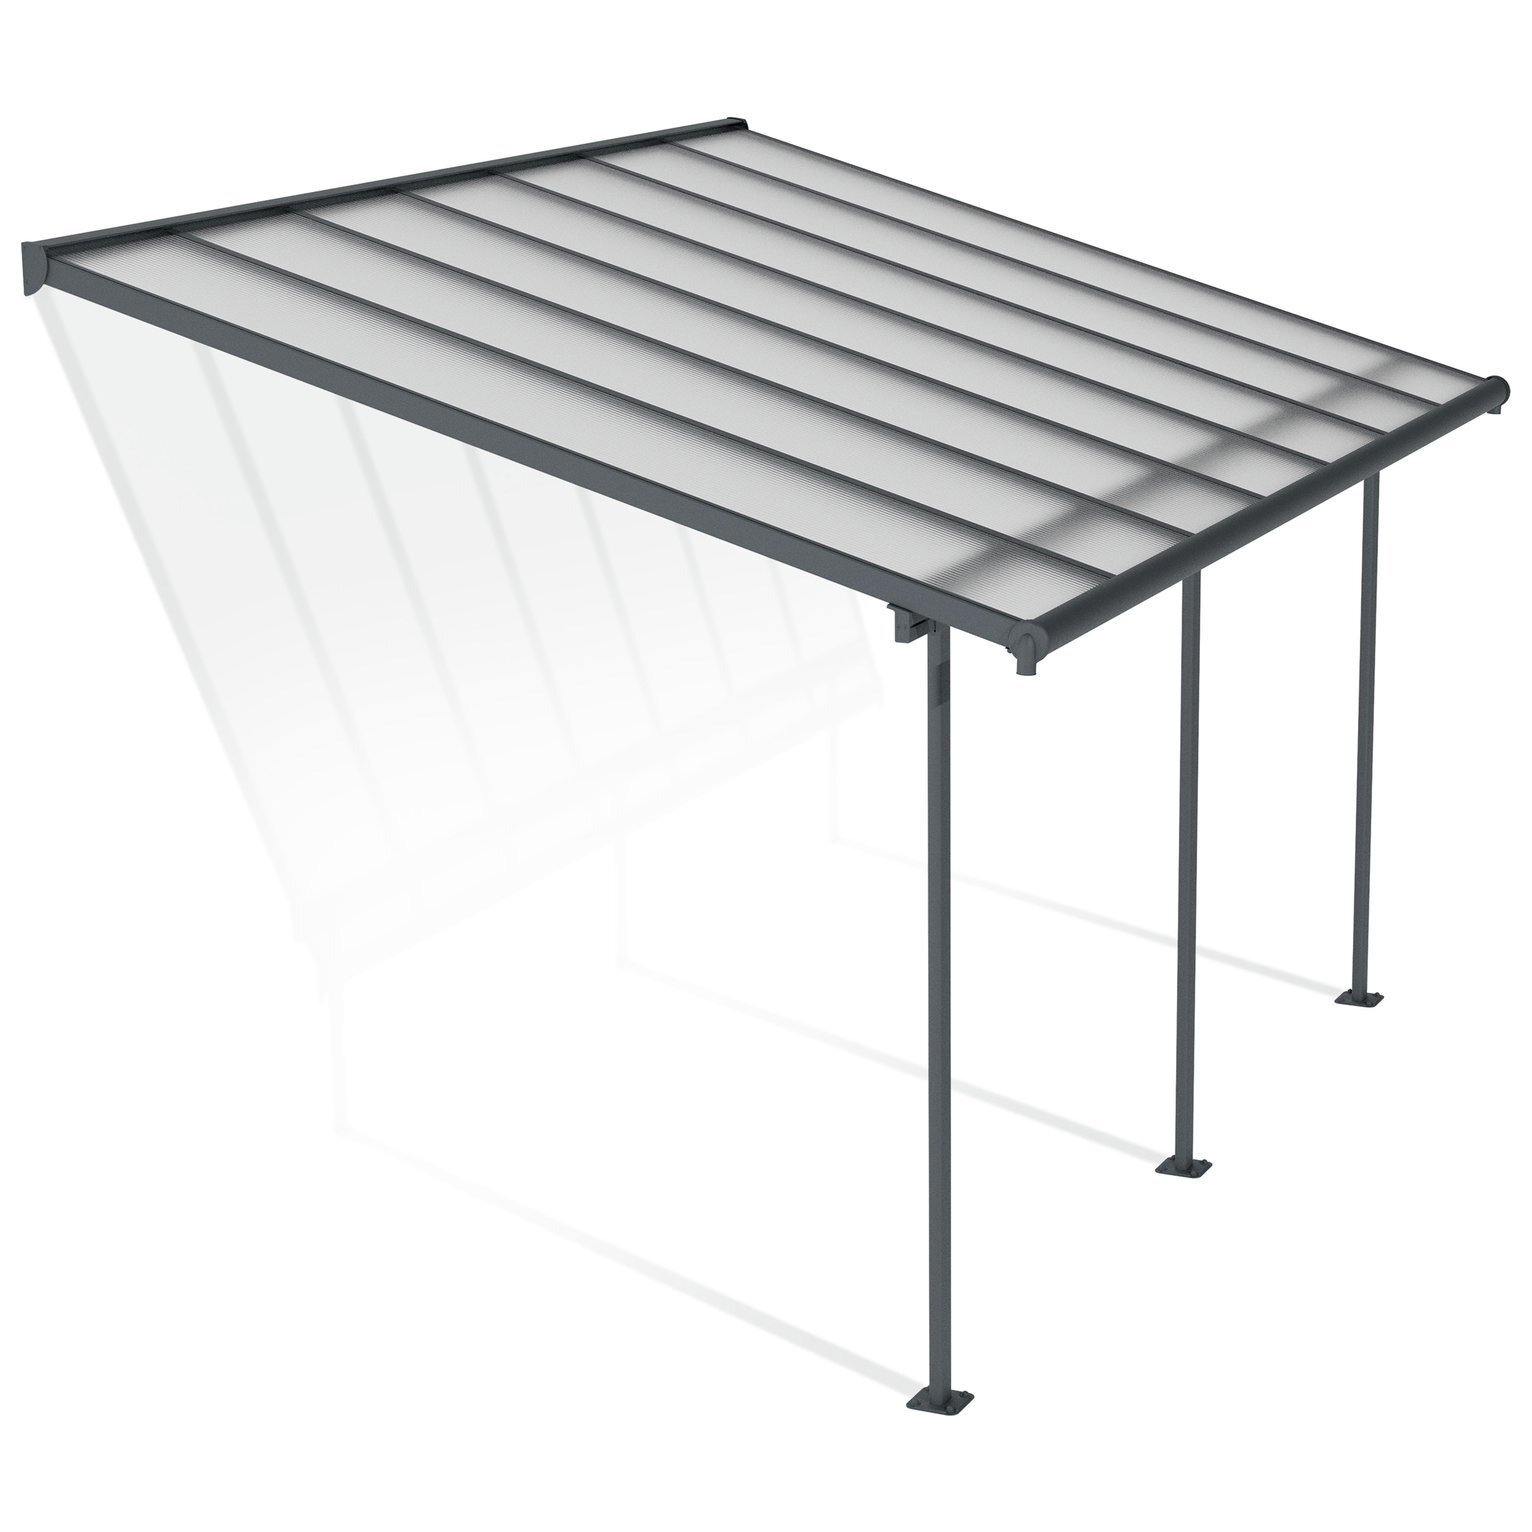 Palram - Canopia Sierra 3 x 4.25m Patio Cover - Grey Clear - image 1